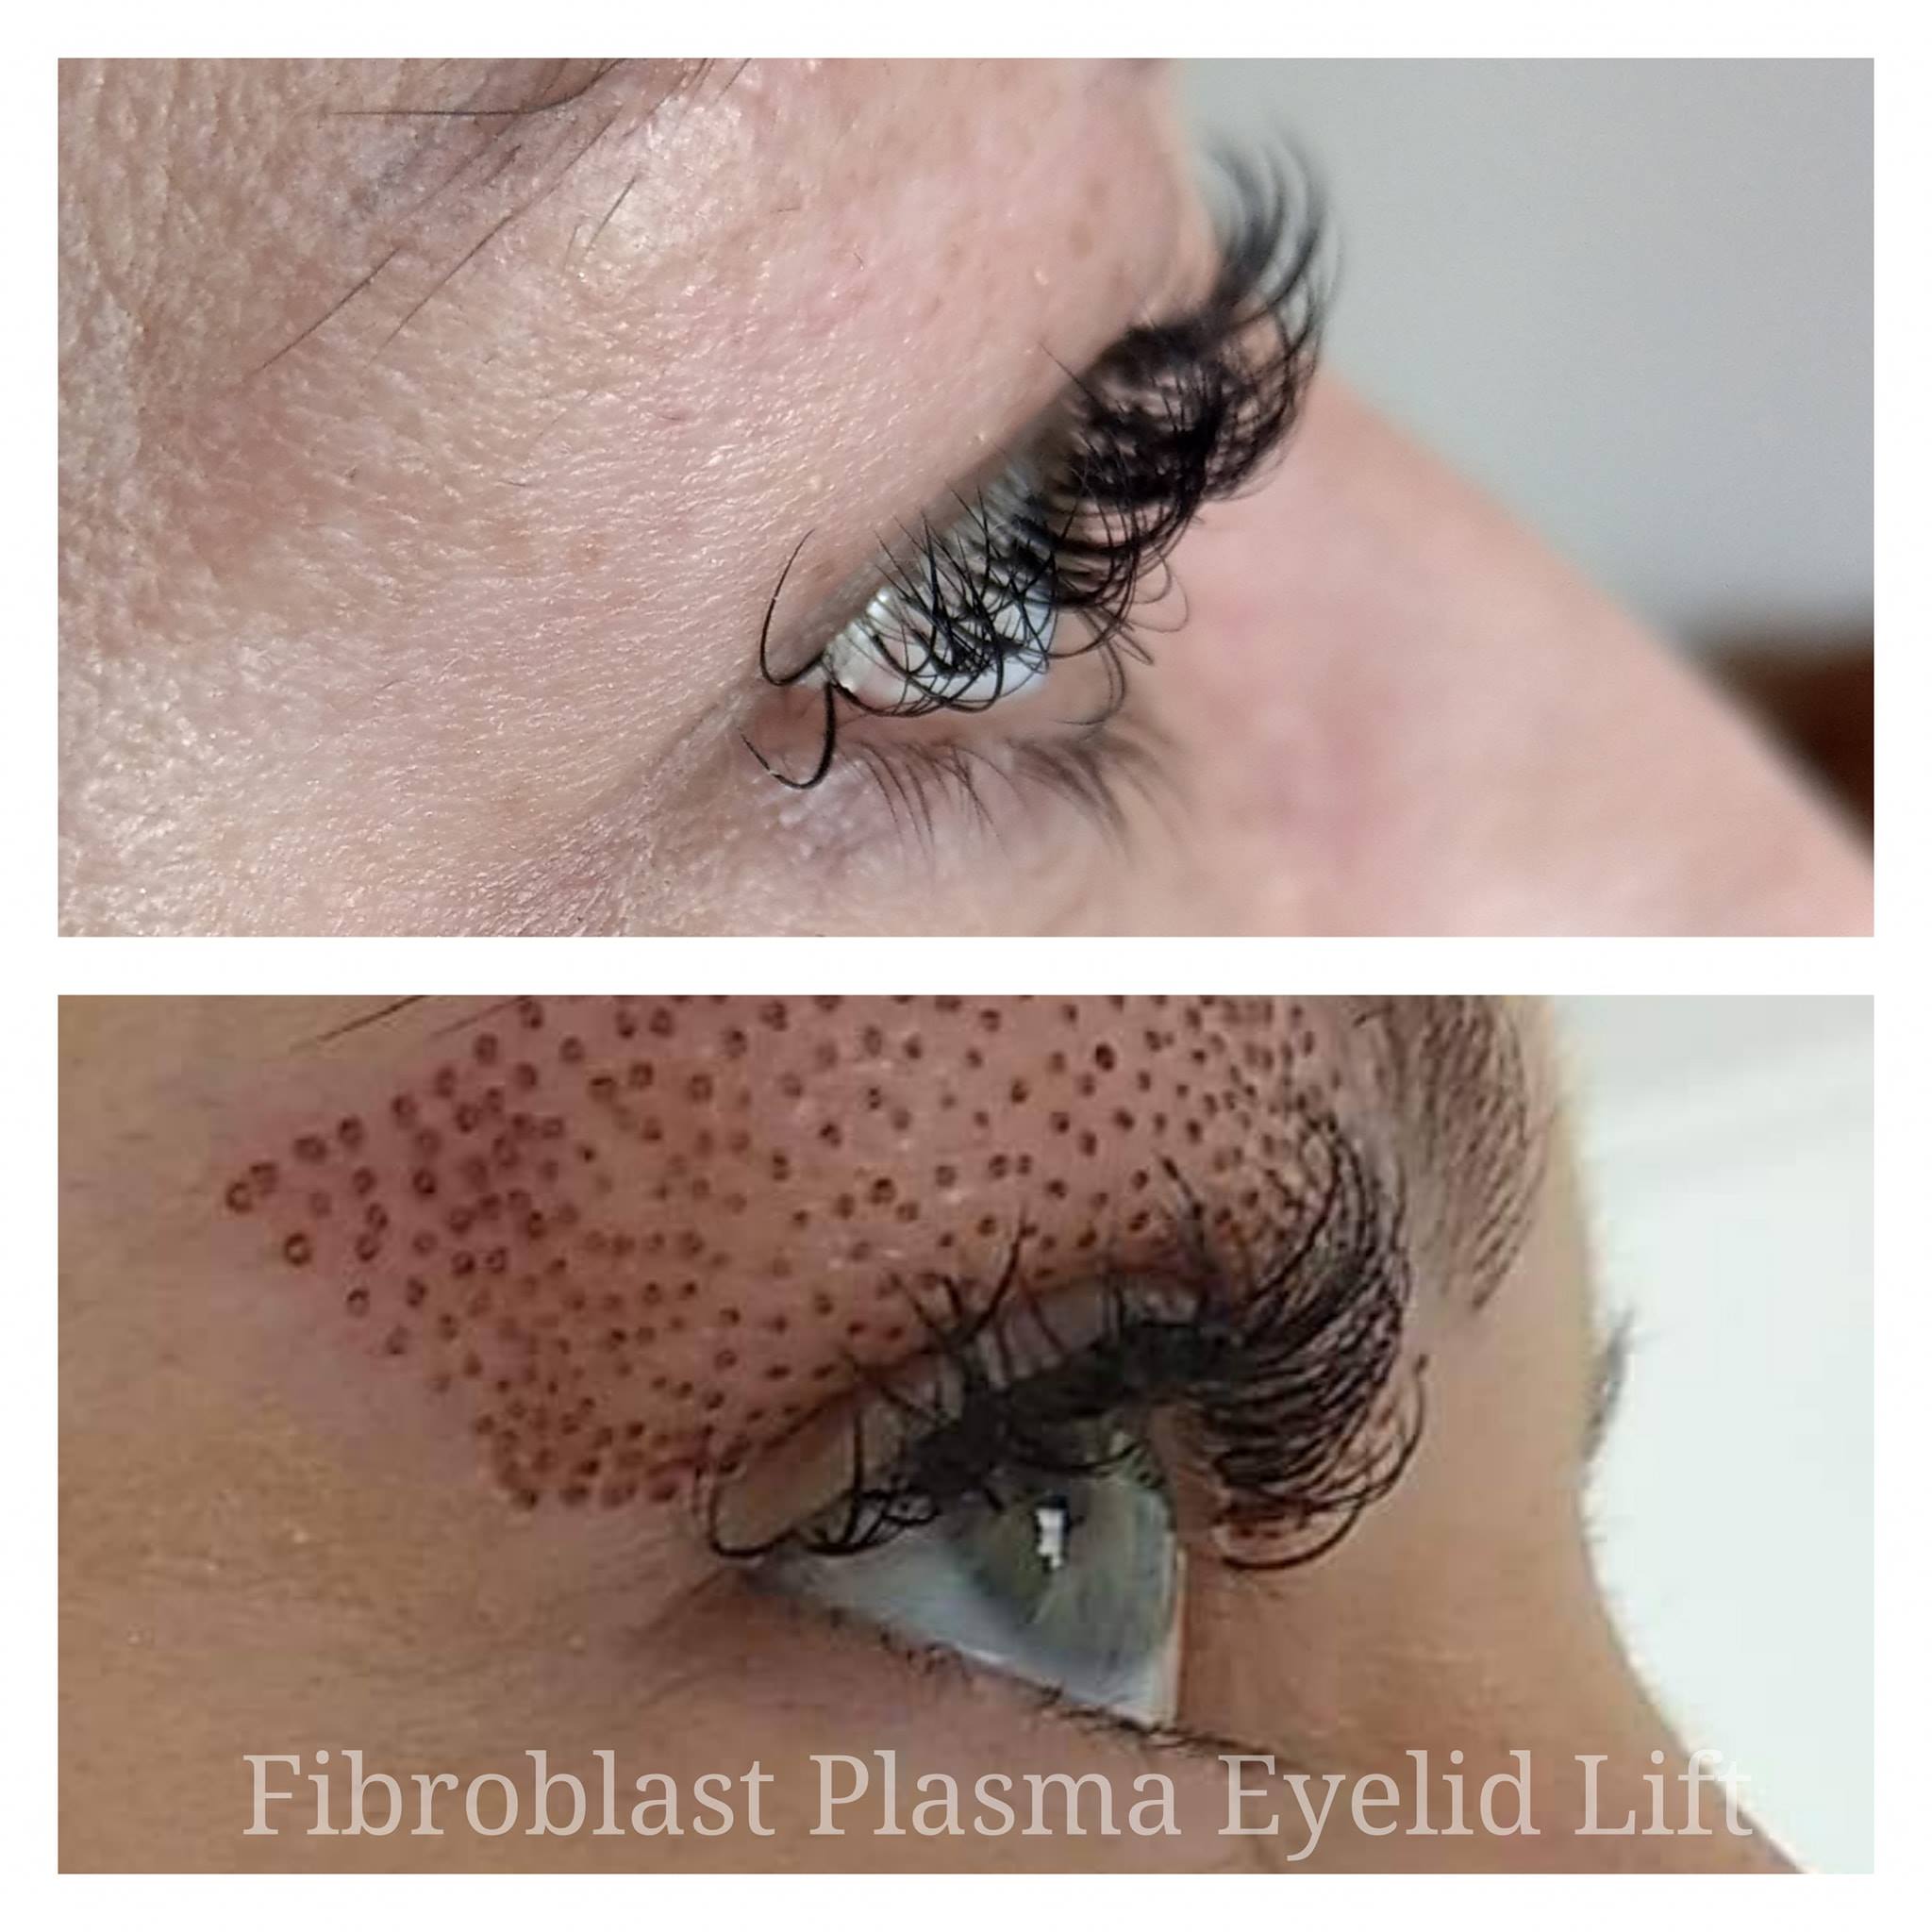 Before and after Fibroblast Plasma Eyelid Lift